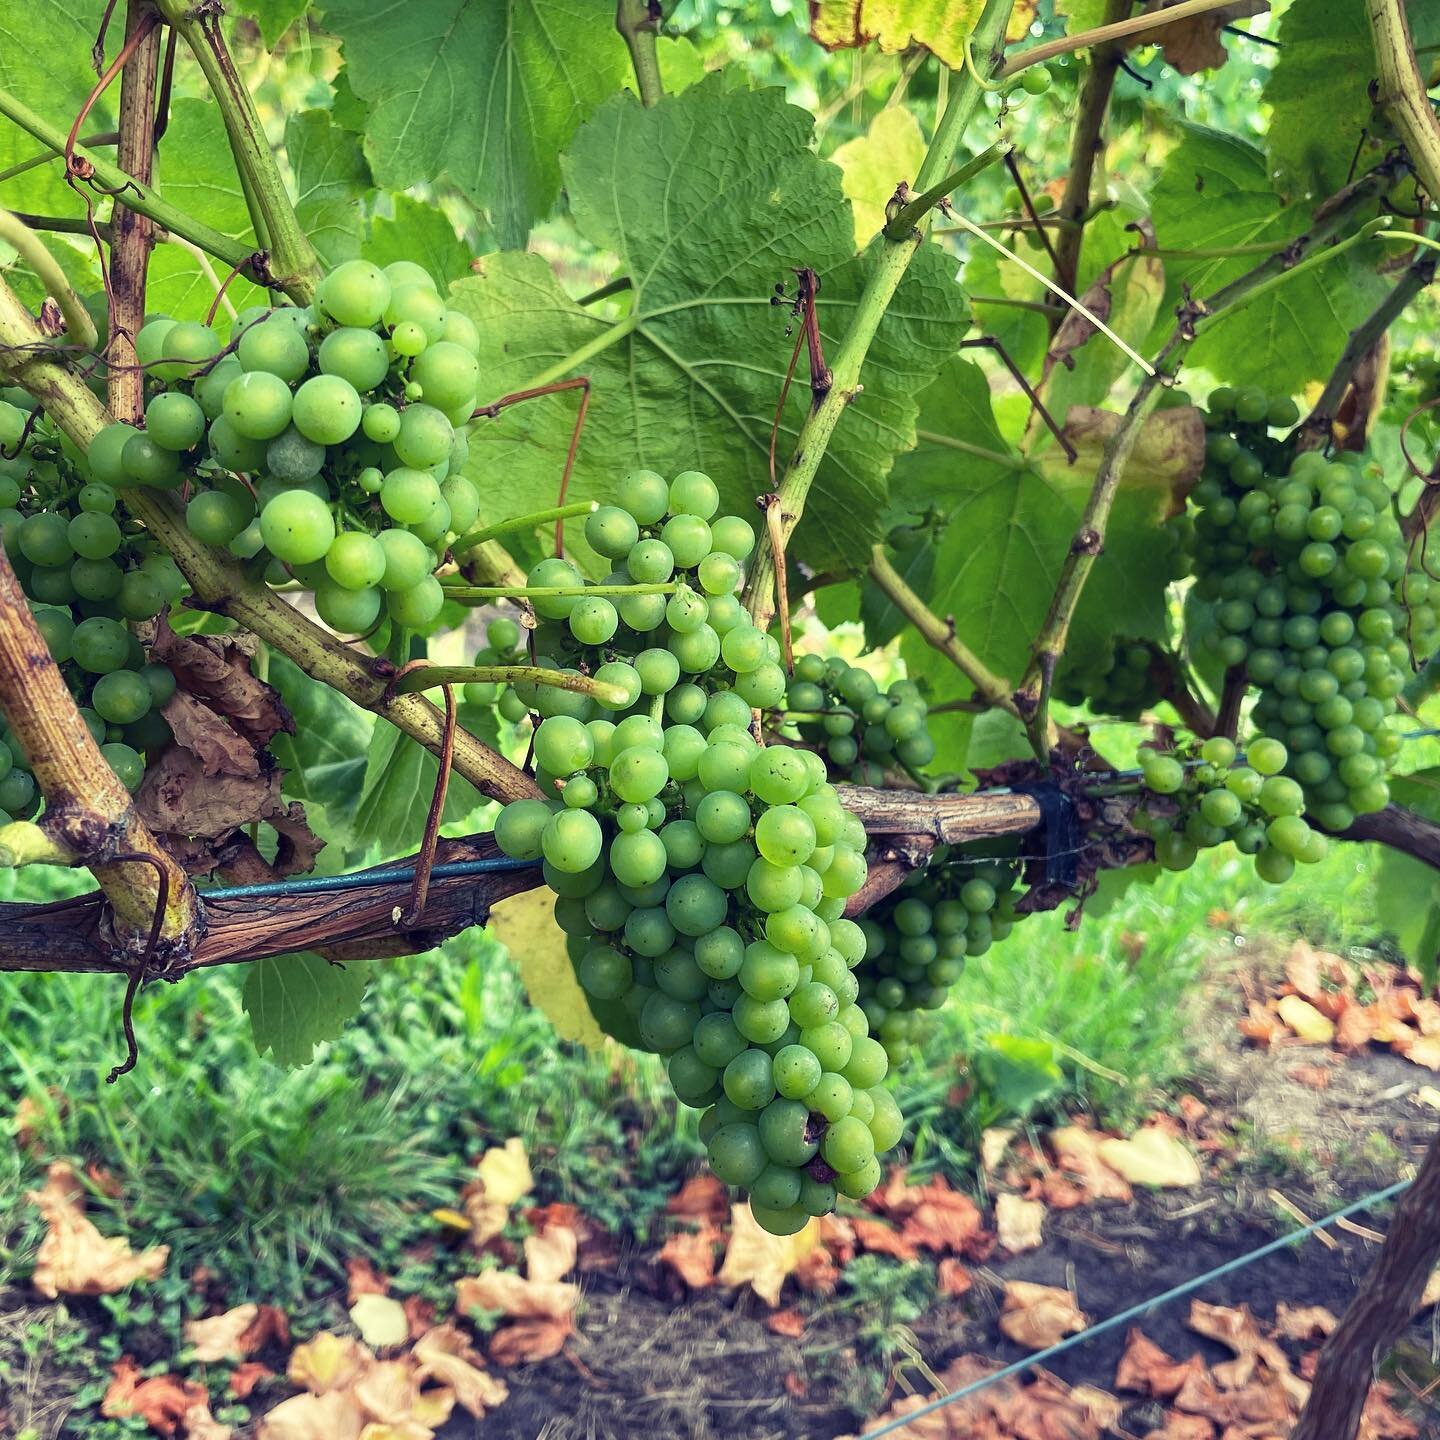 Chardonnay coming along nicely! As we get closer to harvest, we are now leaf plucking the fruit zone on the eastern side of each row. This lets these little babies get some extra morning sun, while still protecting them from wild westerly weather.

#